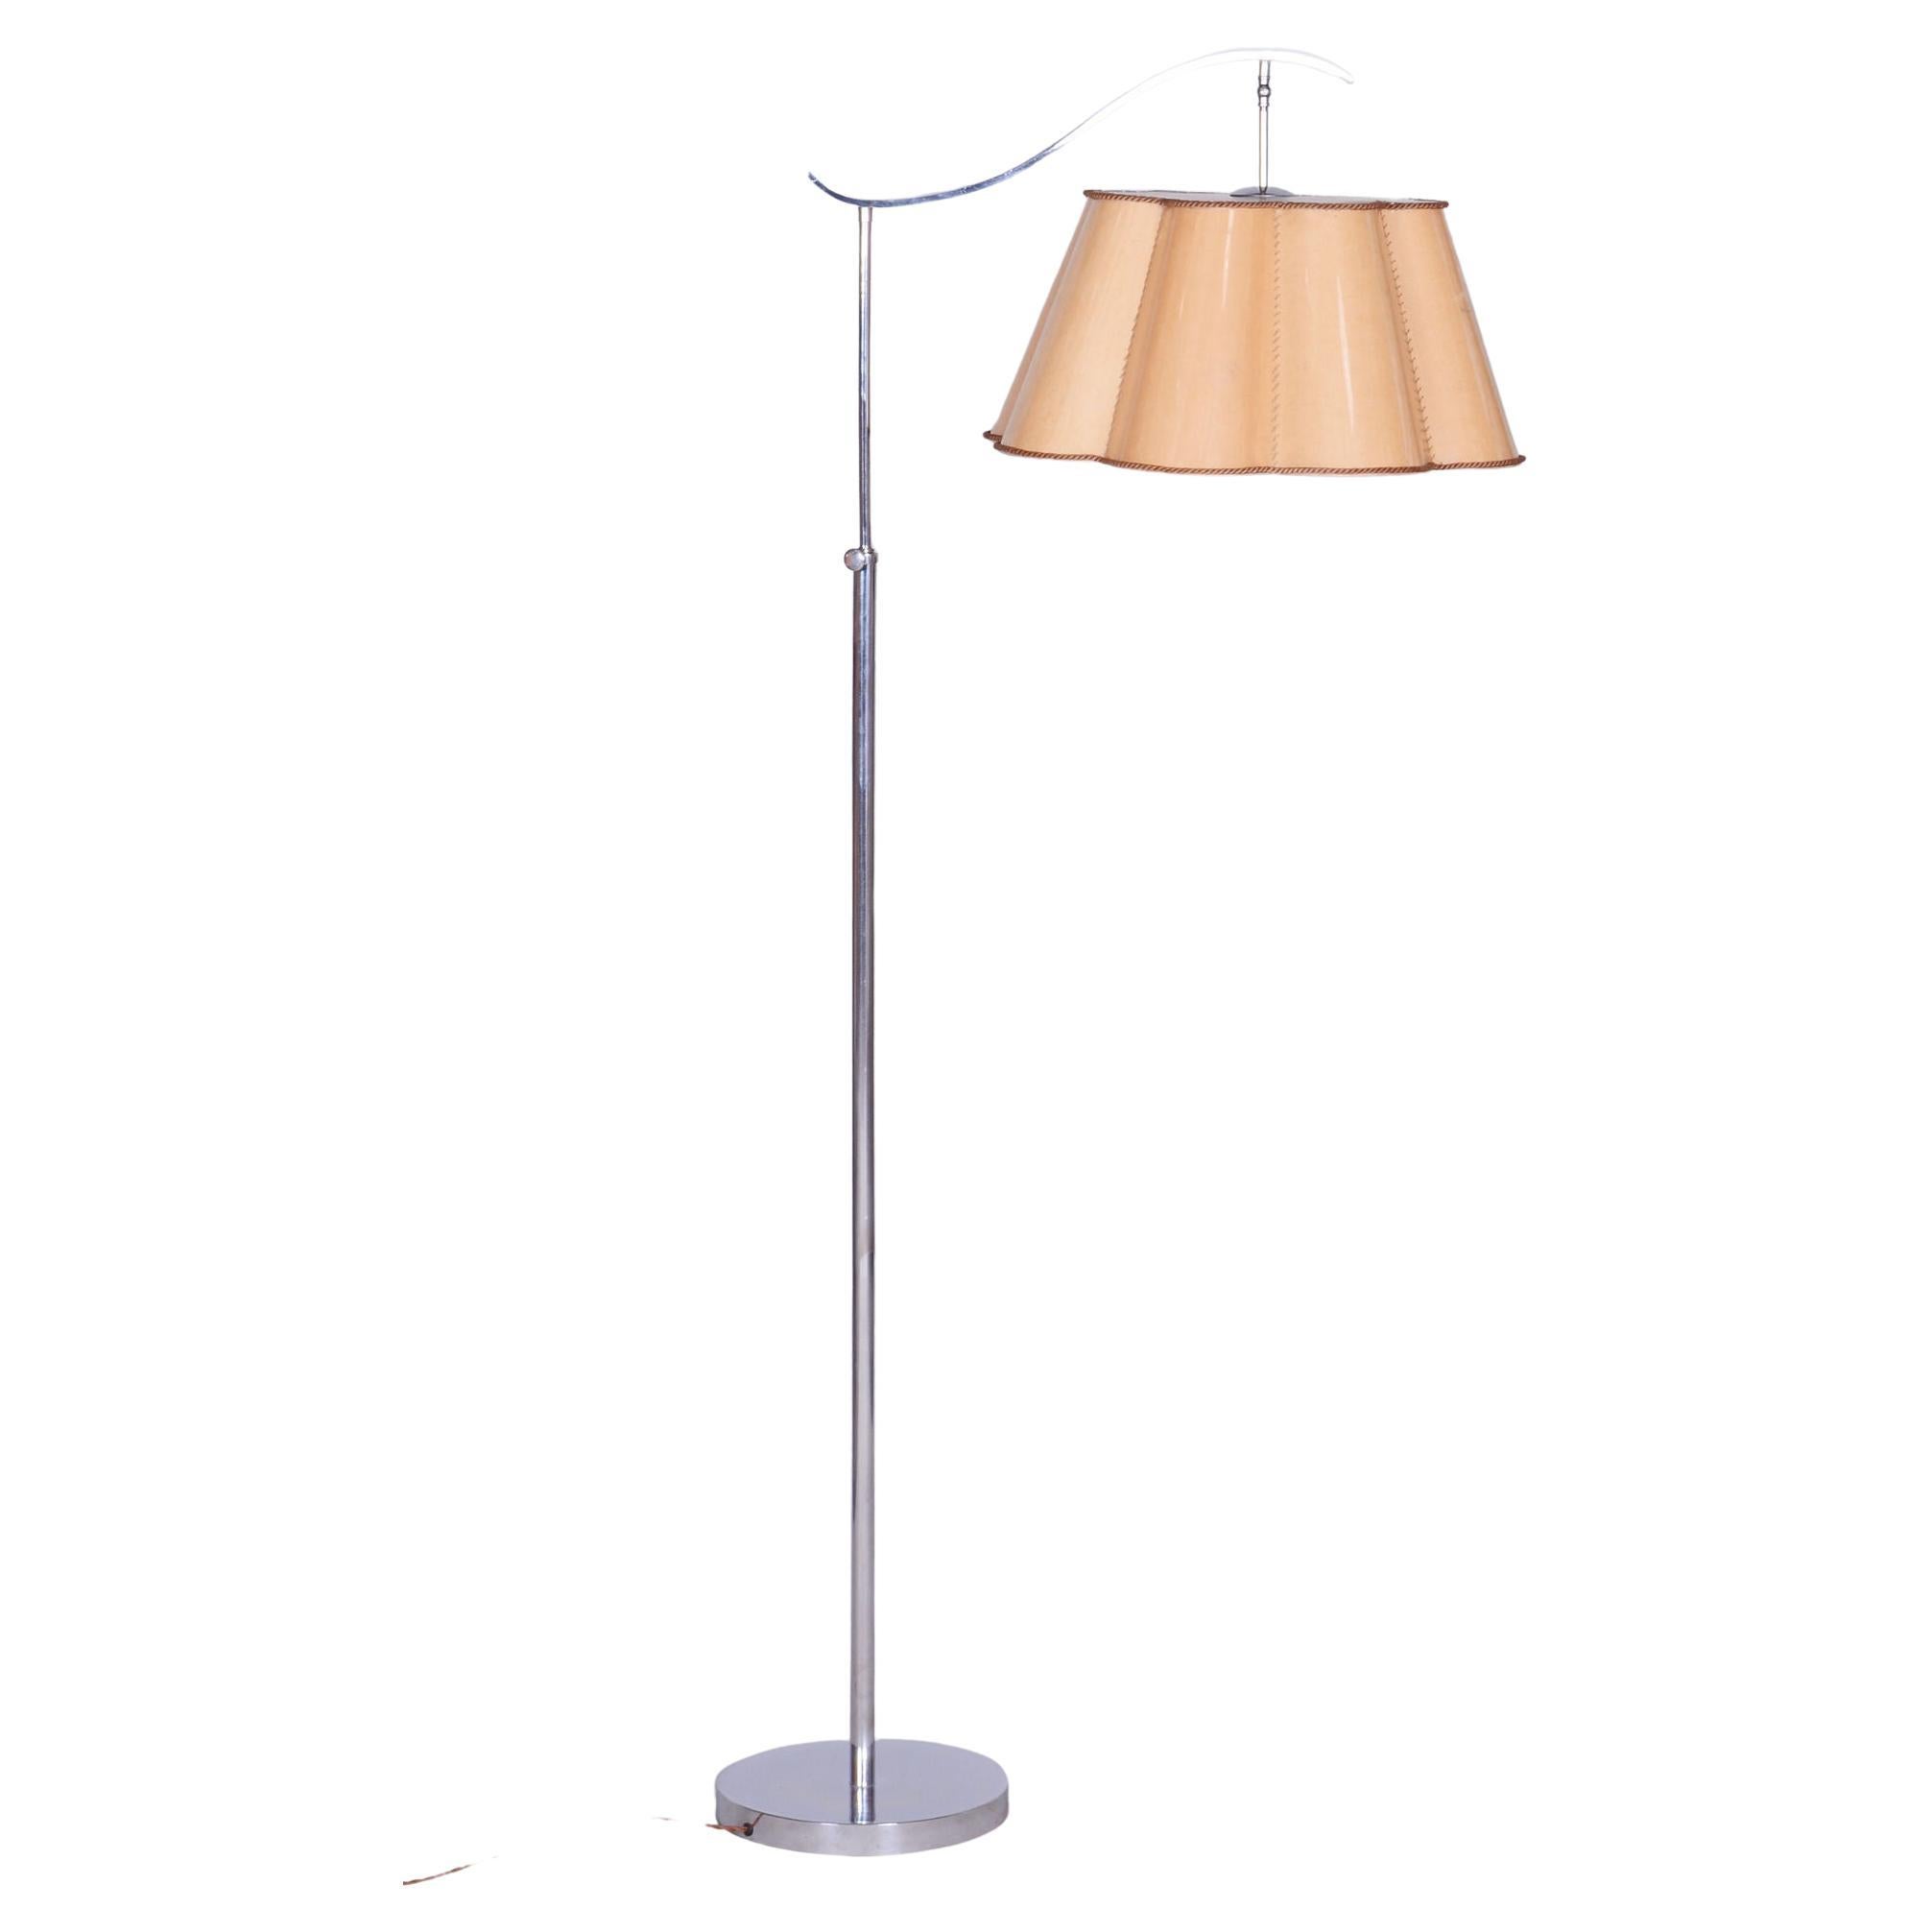 20th Century Czech Bauhaus Chrome Floor Lamp with Parchment Shade, 1920s For Sale